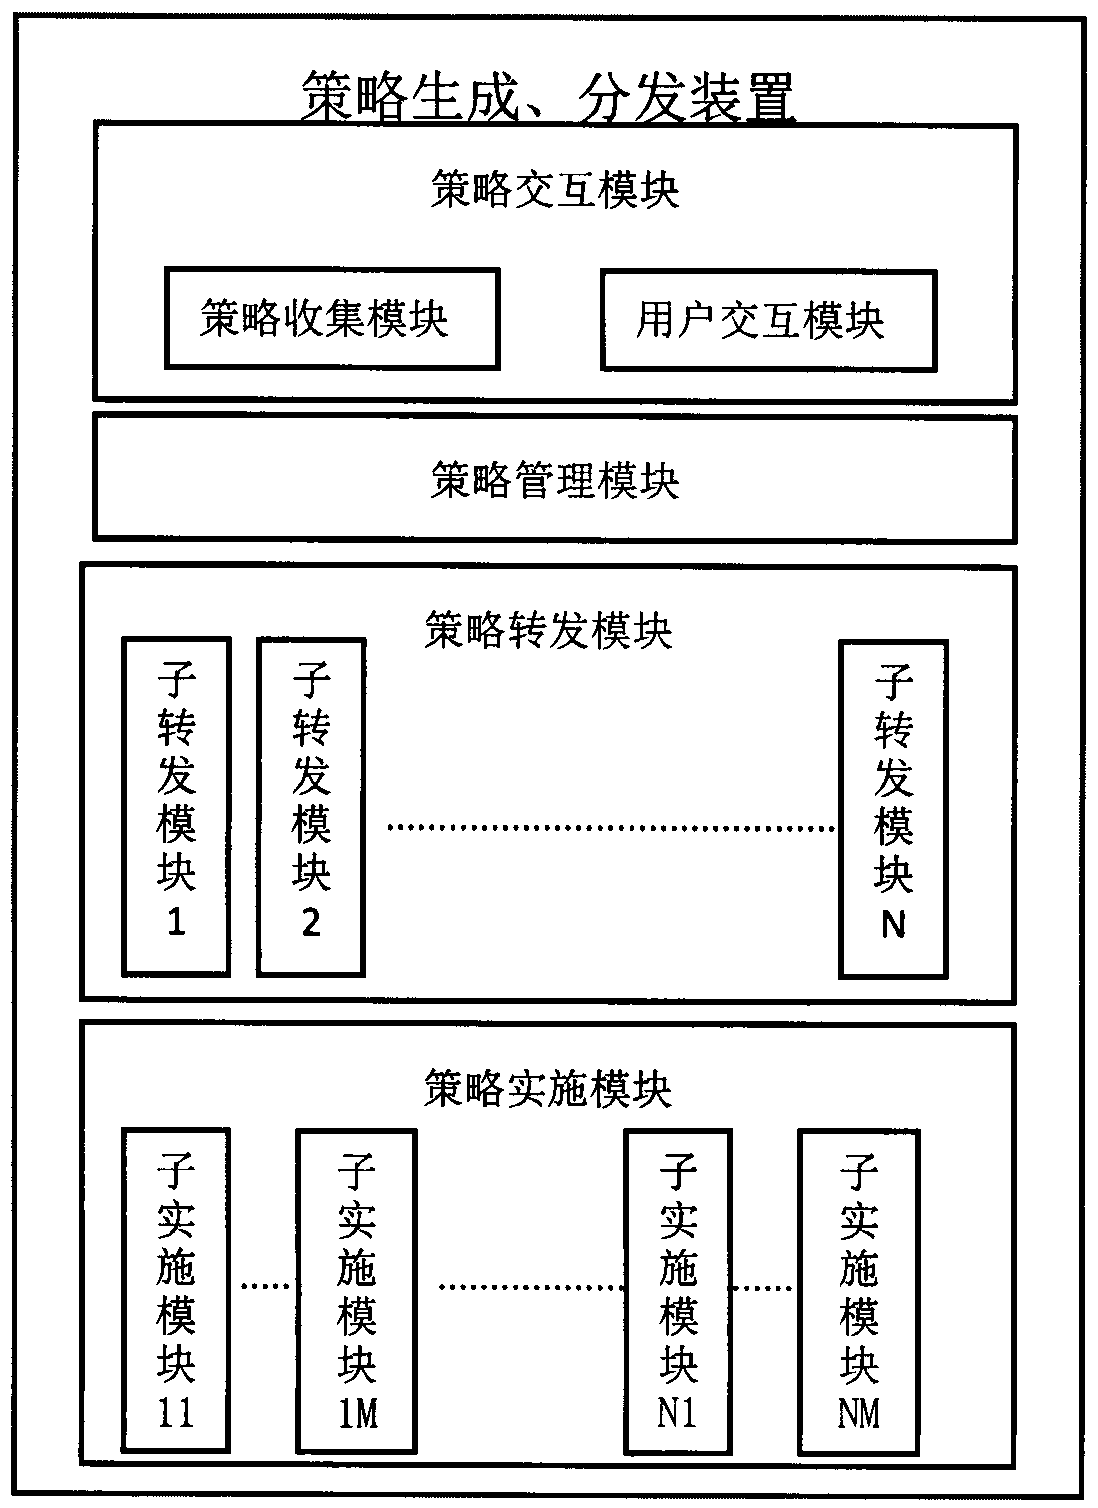 Virtual machine policy management device and management method based on open-stack